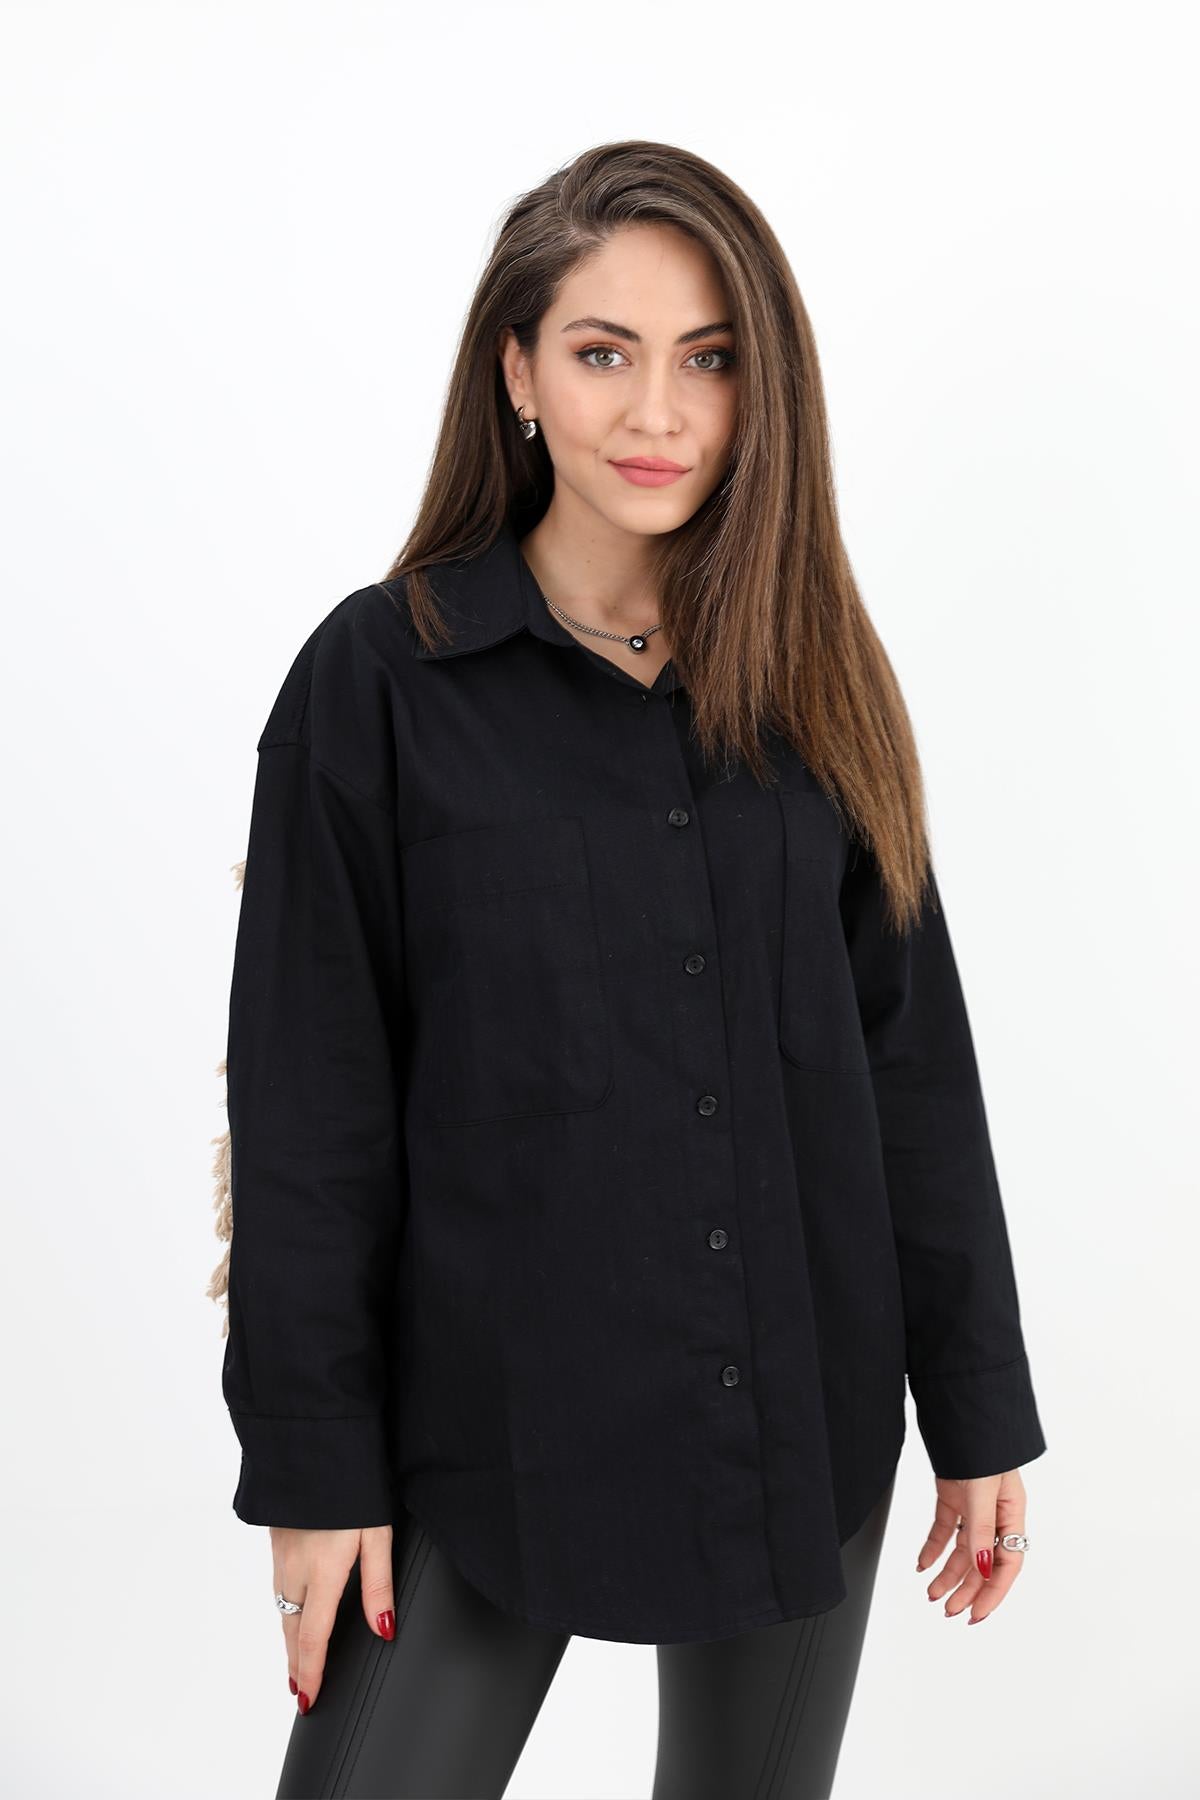 Women's Shirt Gabardine Embroidered on the Back with Tassels - Black - STREETMODE™